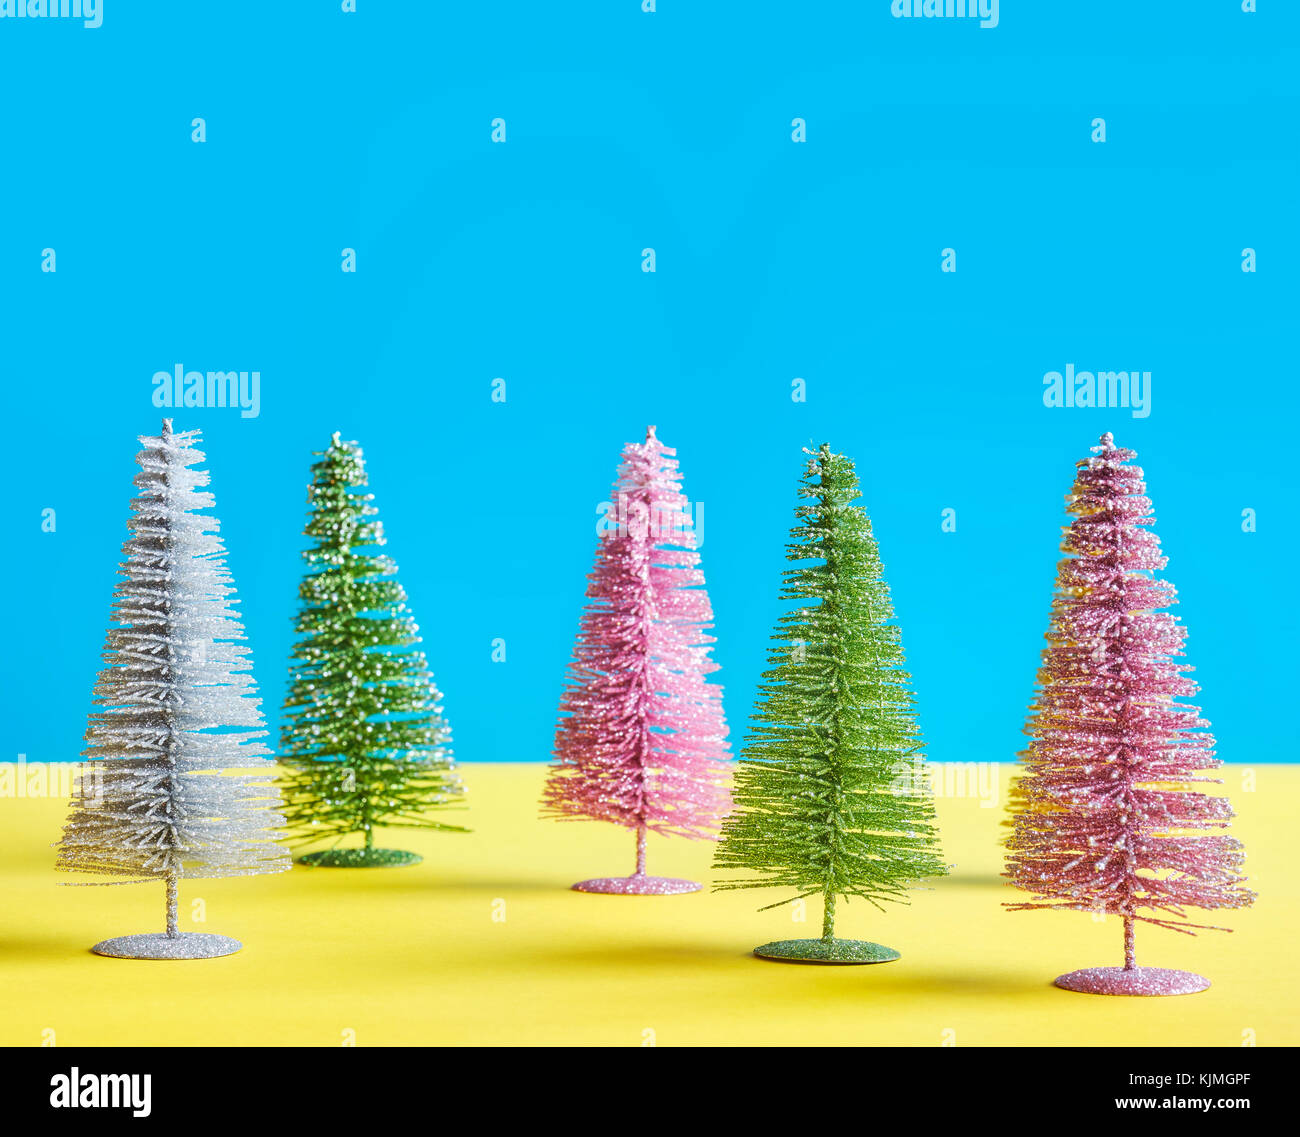 Miniature multicolored Christmas trees on blue and yellow background, space for text. Stock Photo